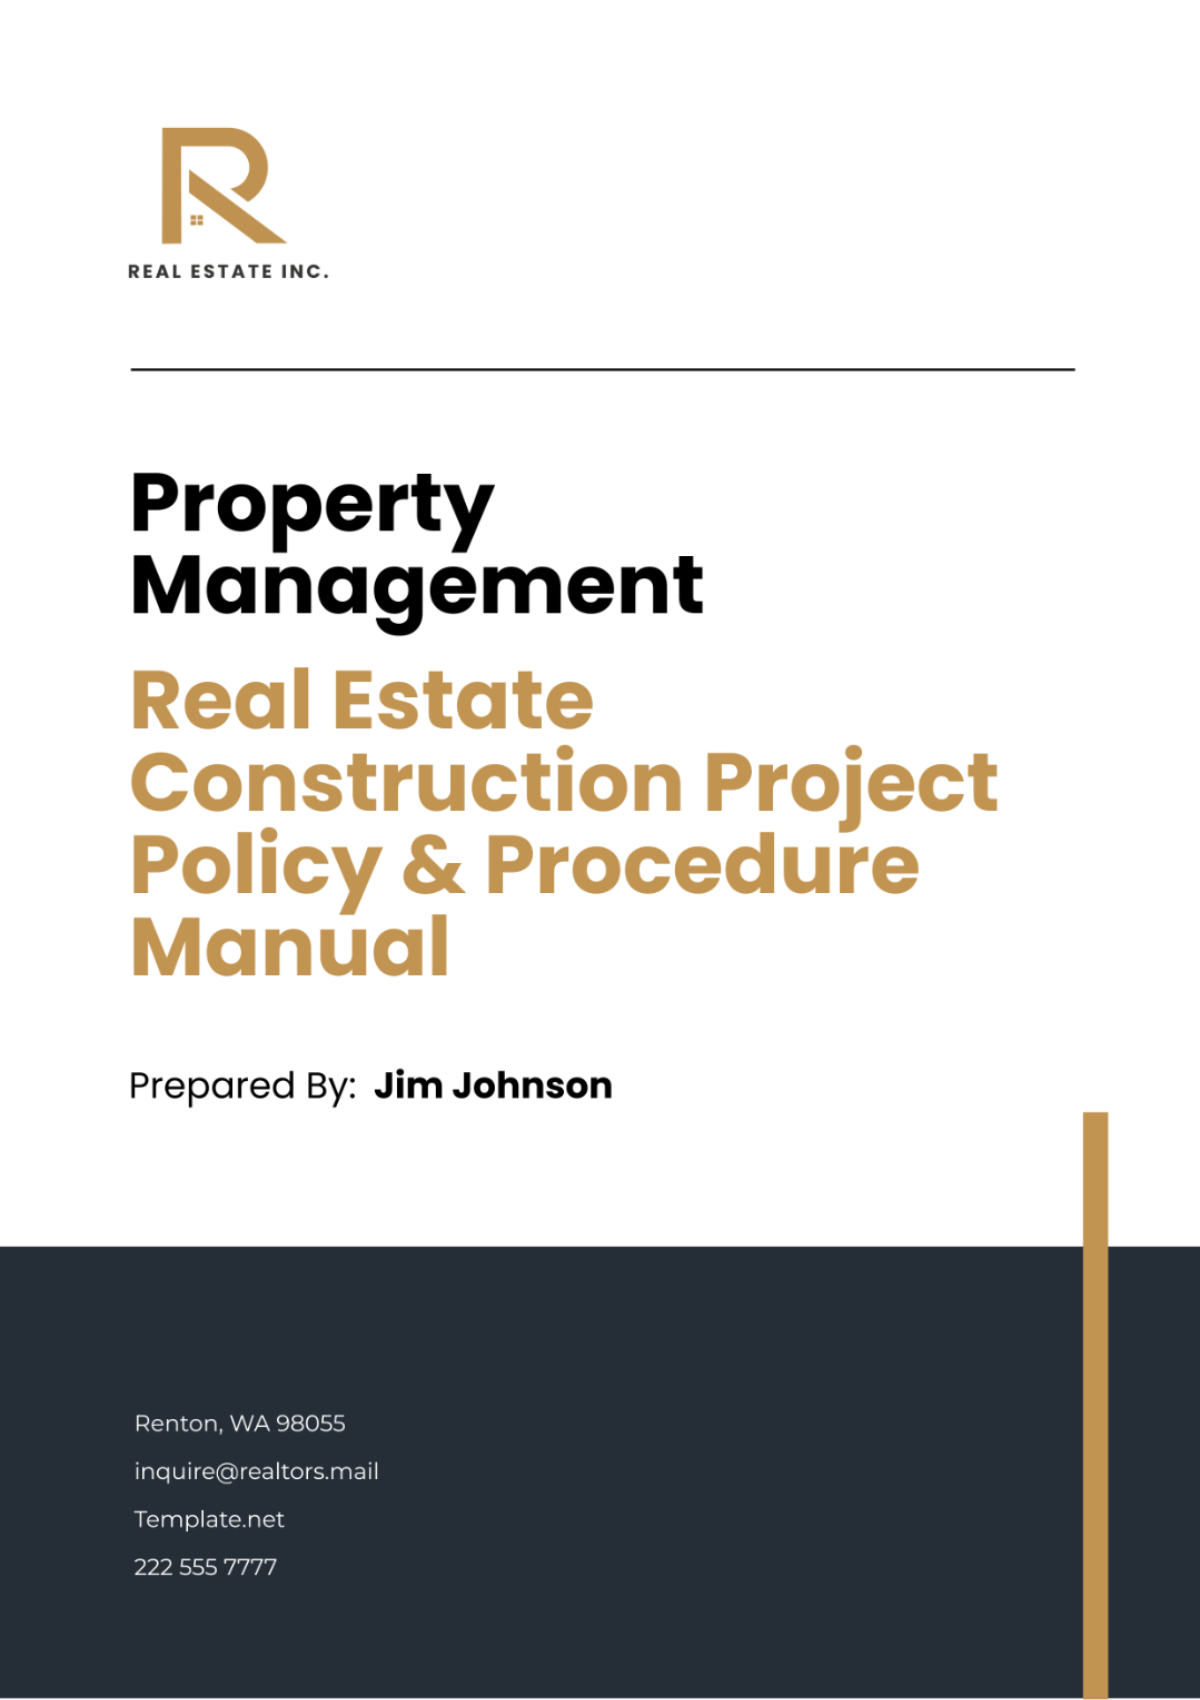 Free Real Estate Construction Project Policy & Procedure Manual Template